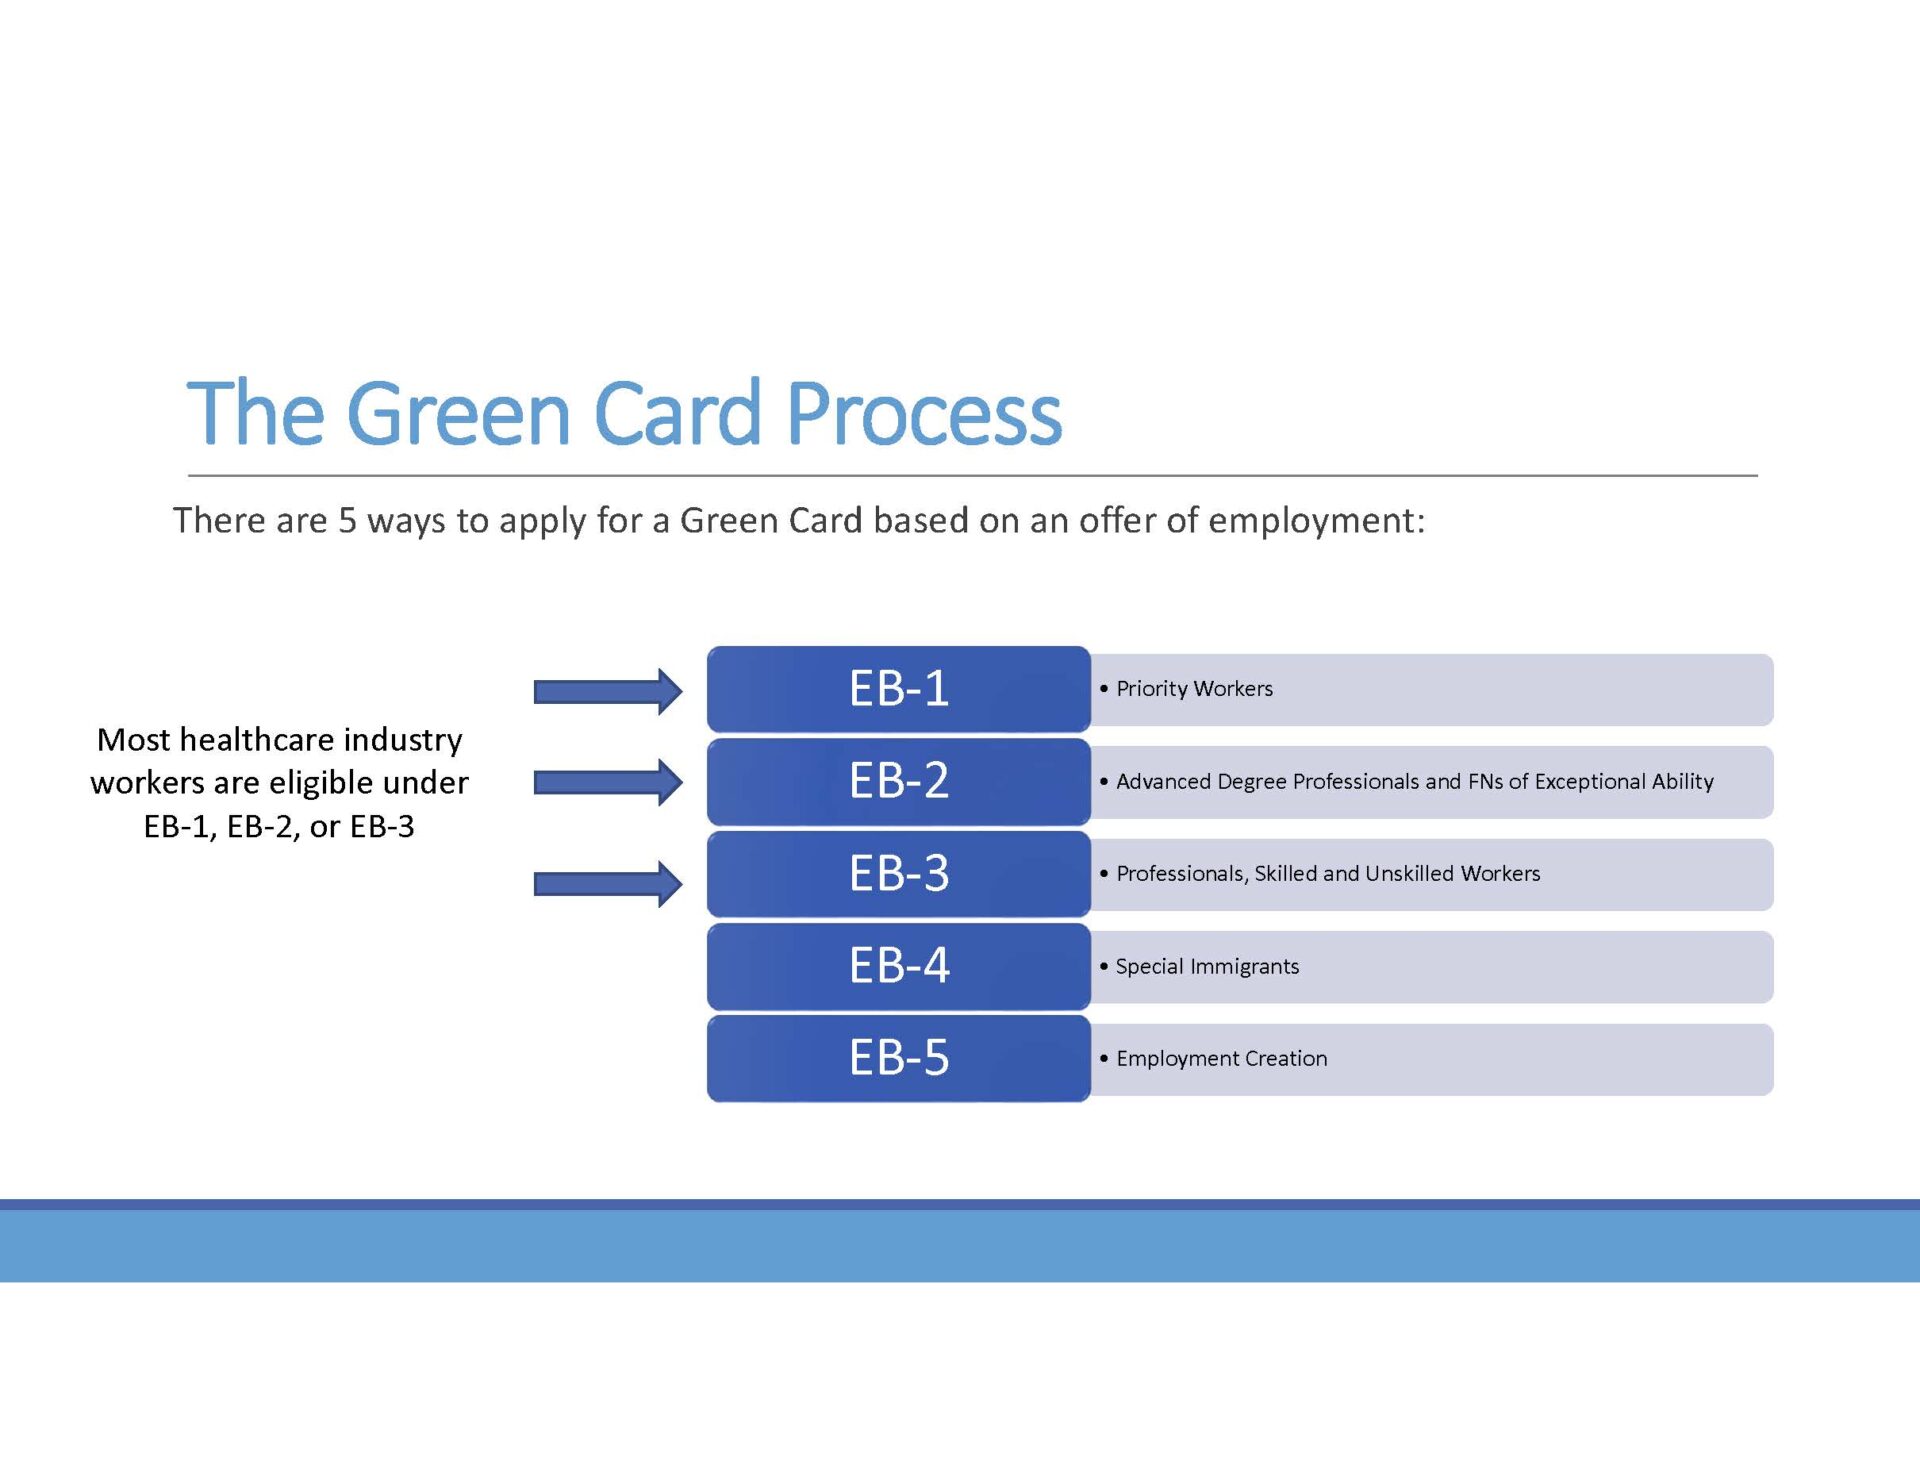 Green Card - EB2 with Low Salary vs EB3 with High Salary?